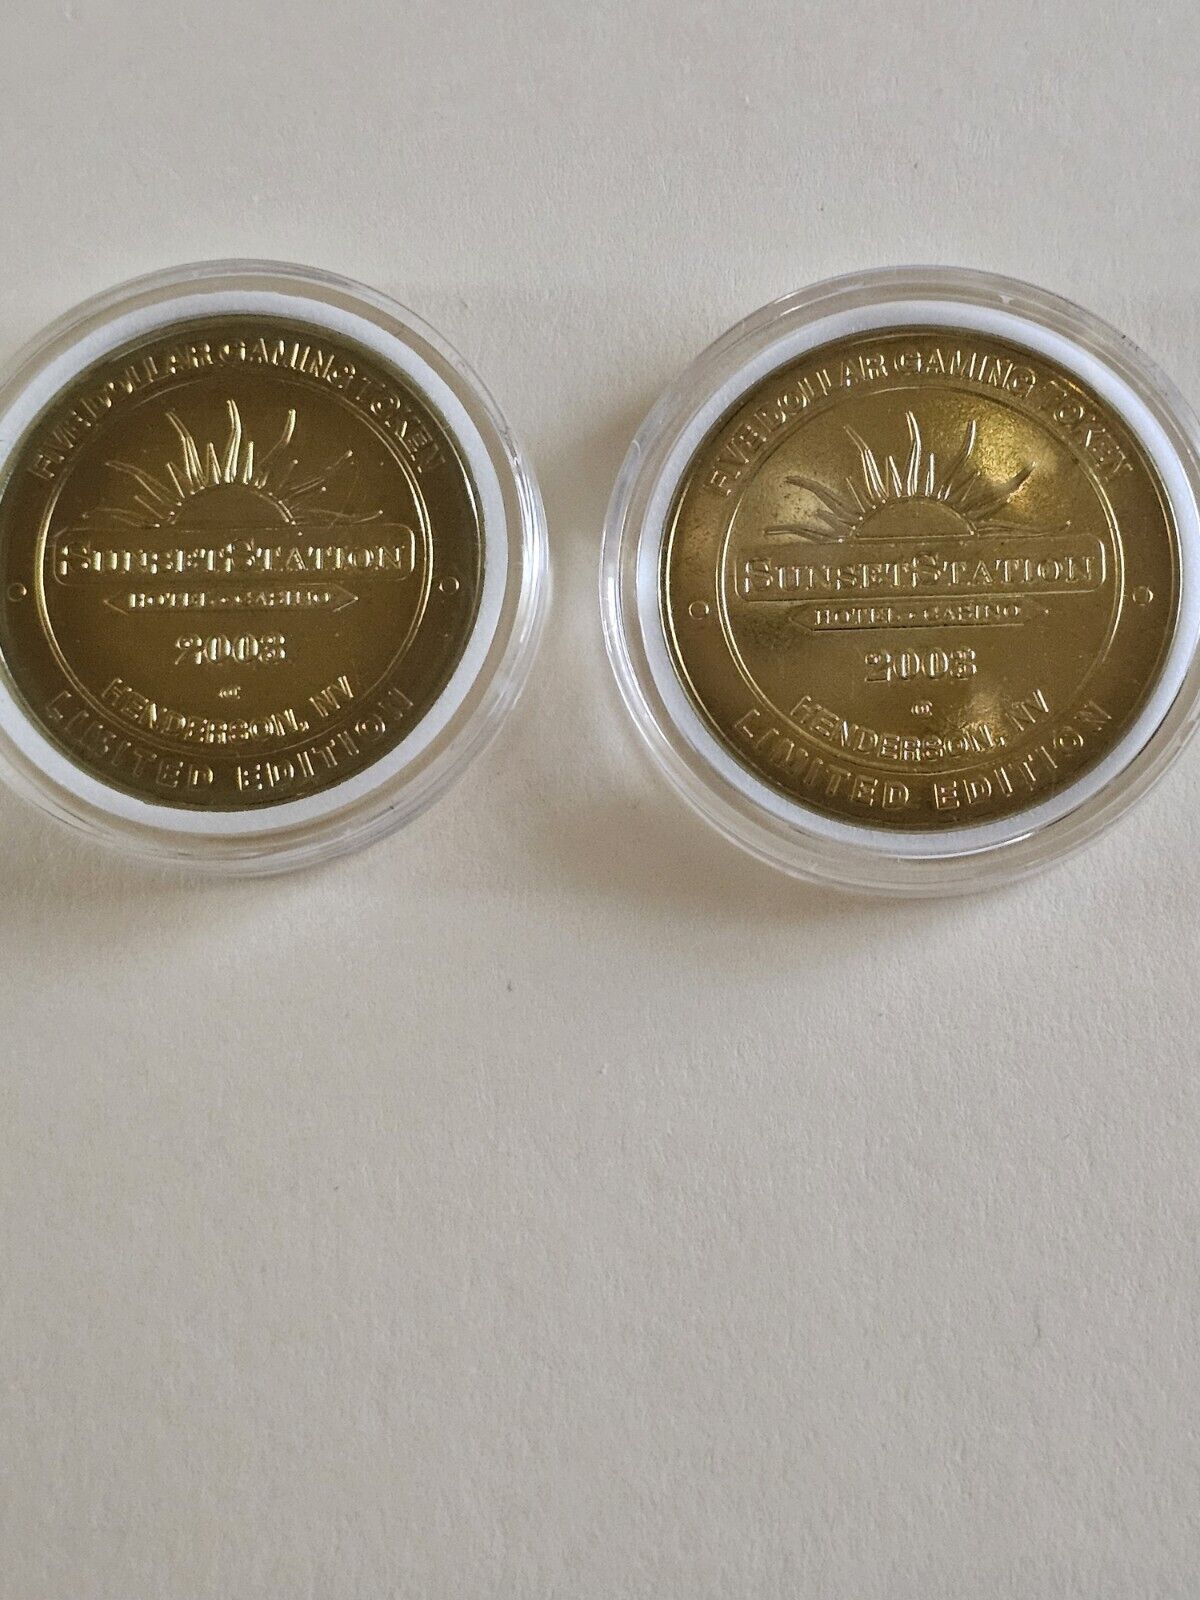 Sunset Station Casino Henderson NV Limited Edition .999 Silver $5 Tokens